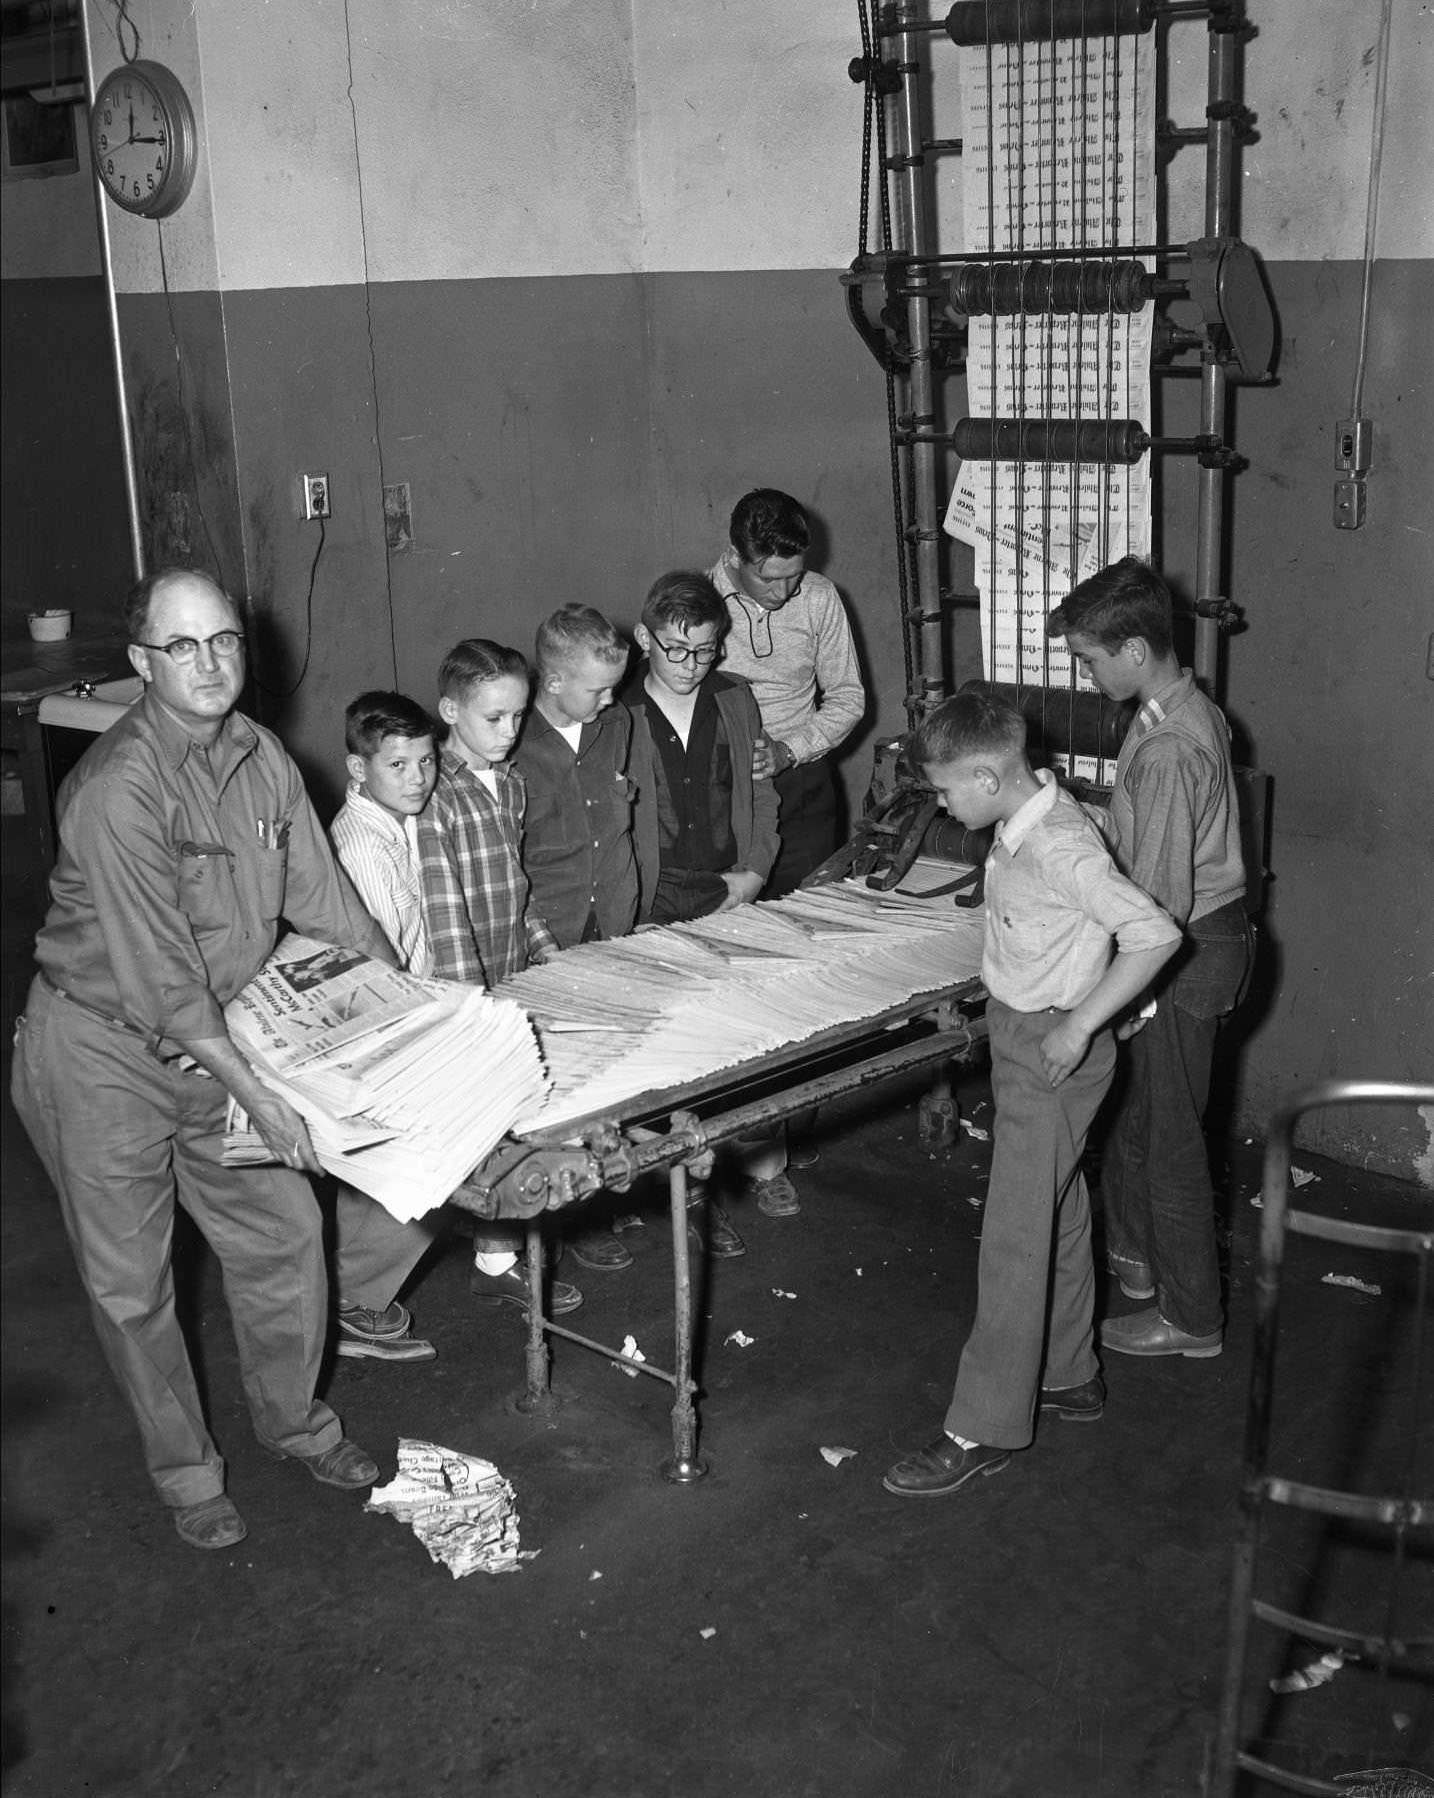 Abilene Reporter News boys and a man standing around a newspaper printer, looking at the stack of newspapers on the machine, 1955